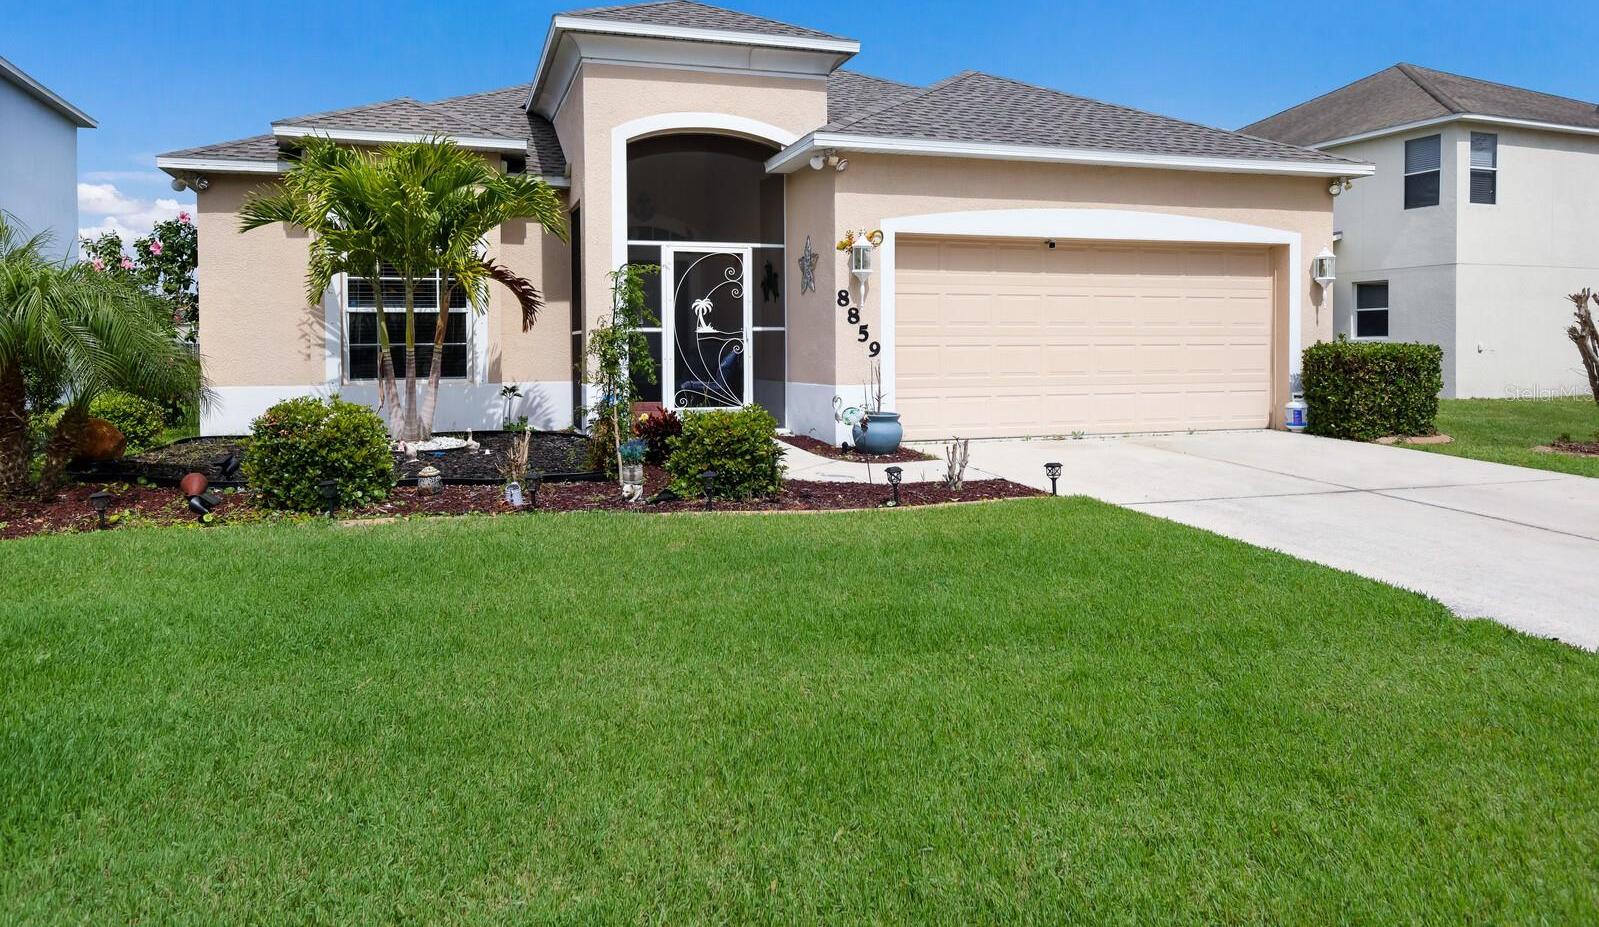 Photo one of 8859 Founders Cir Palmetto FL 34221 | MLS A4602223